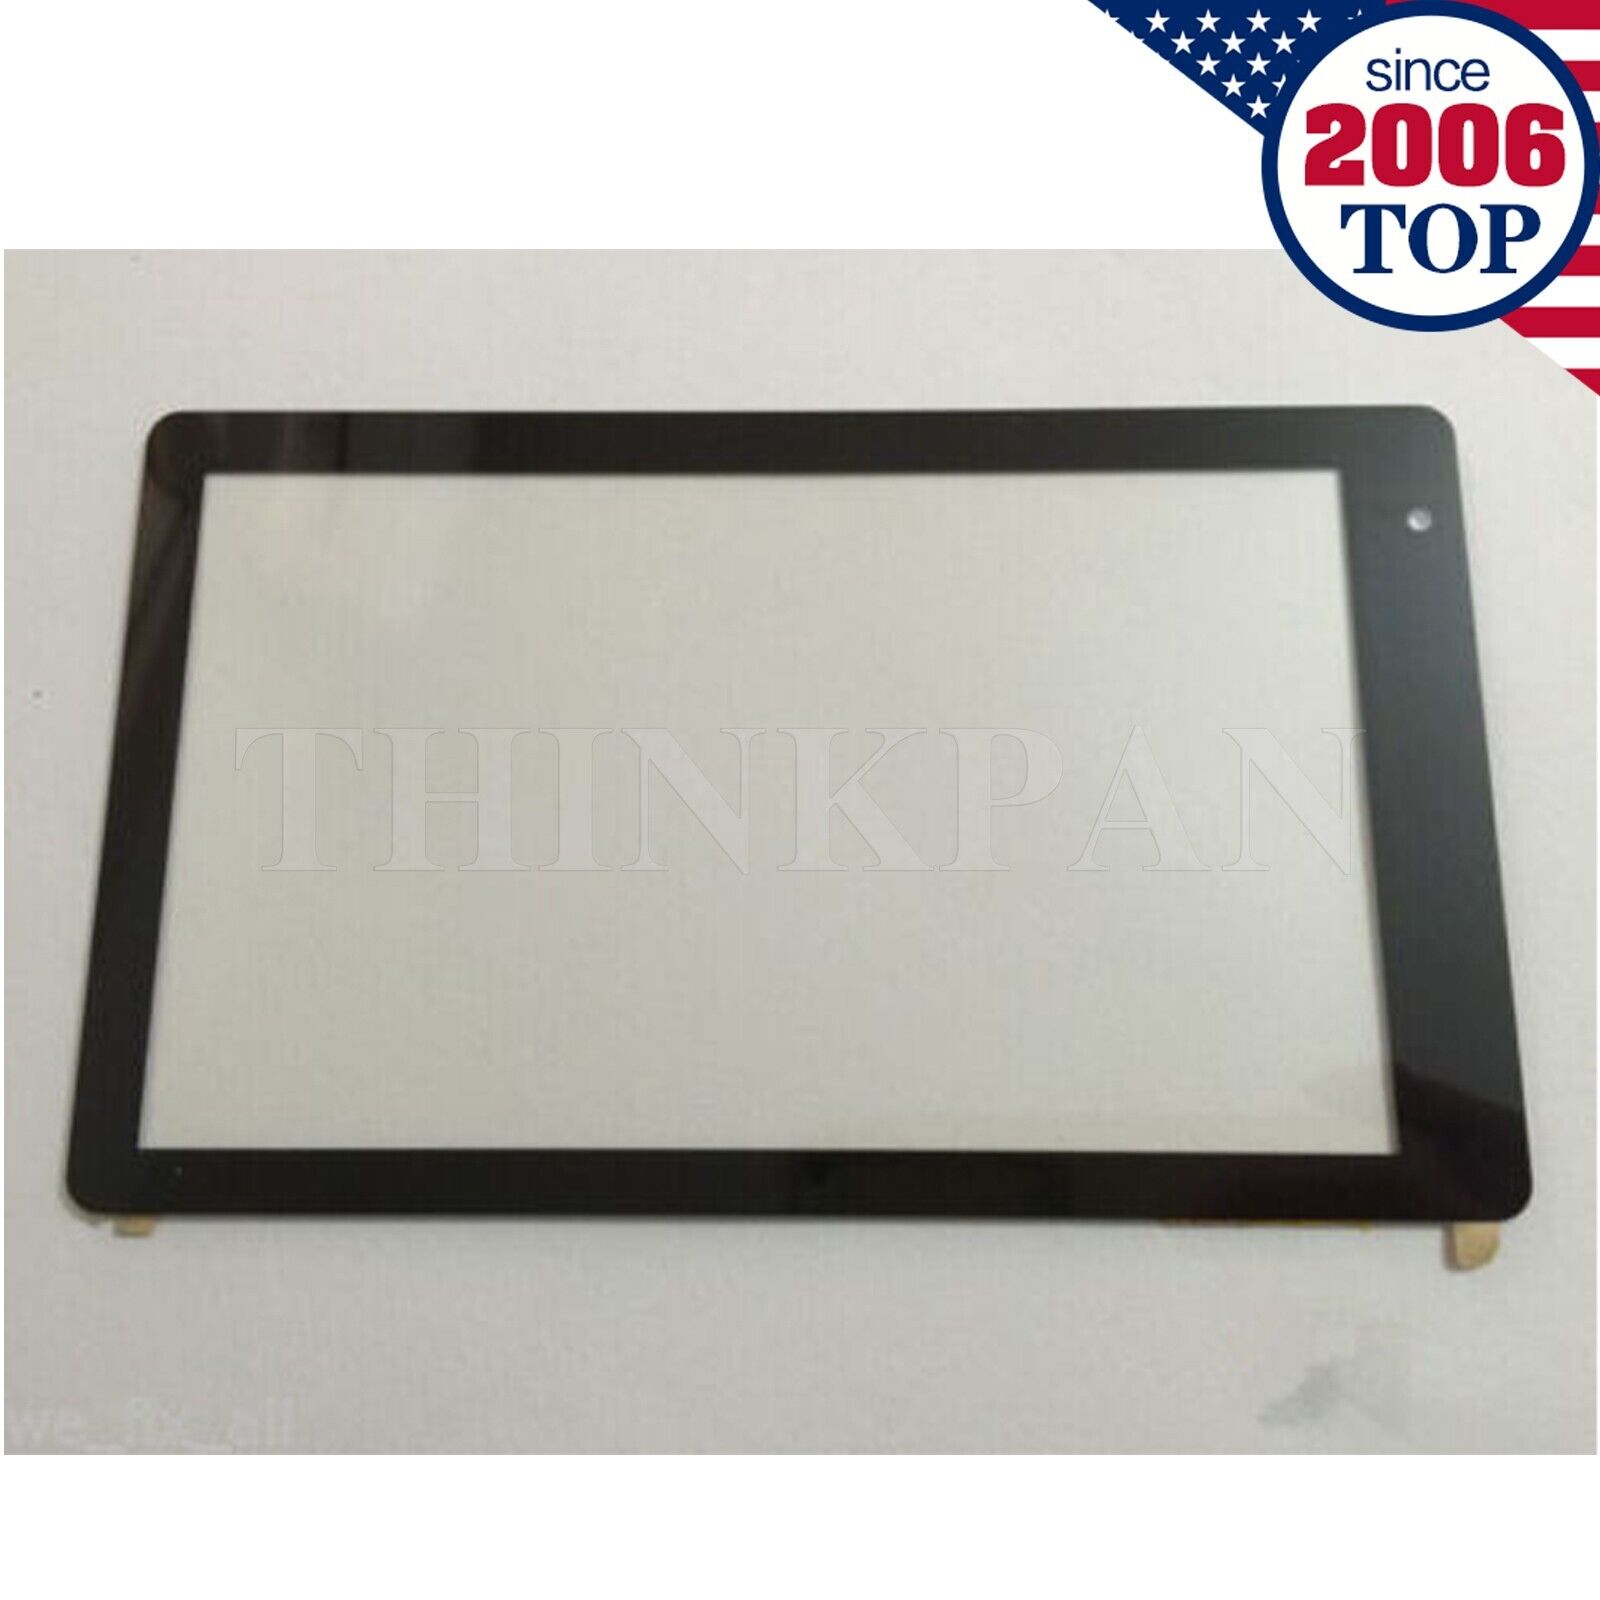 New 7 Inch Black touch screen Digitizer for RCA Voyager Pro RCT6773W42B USA